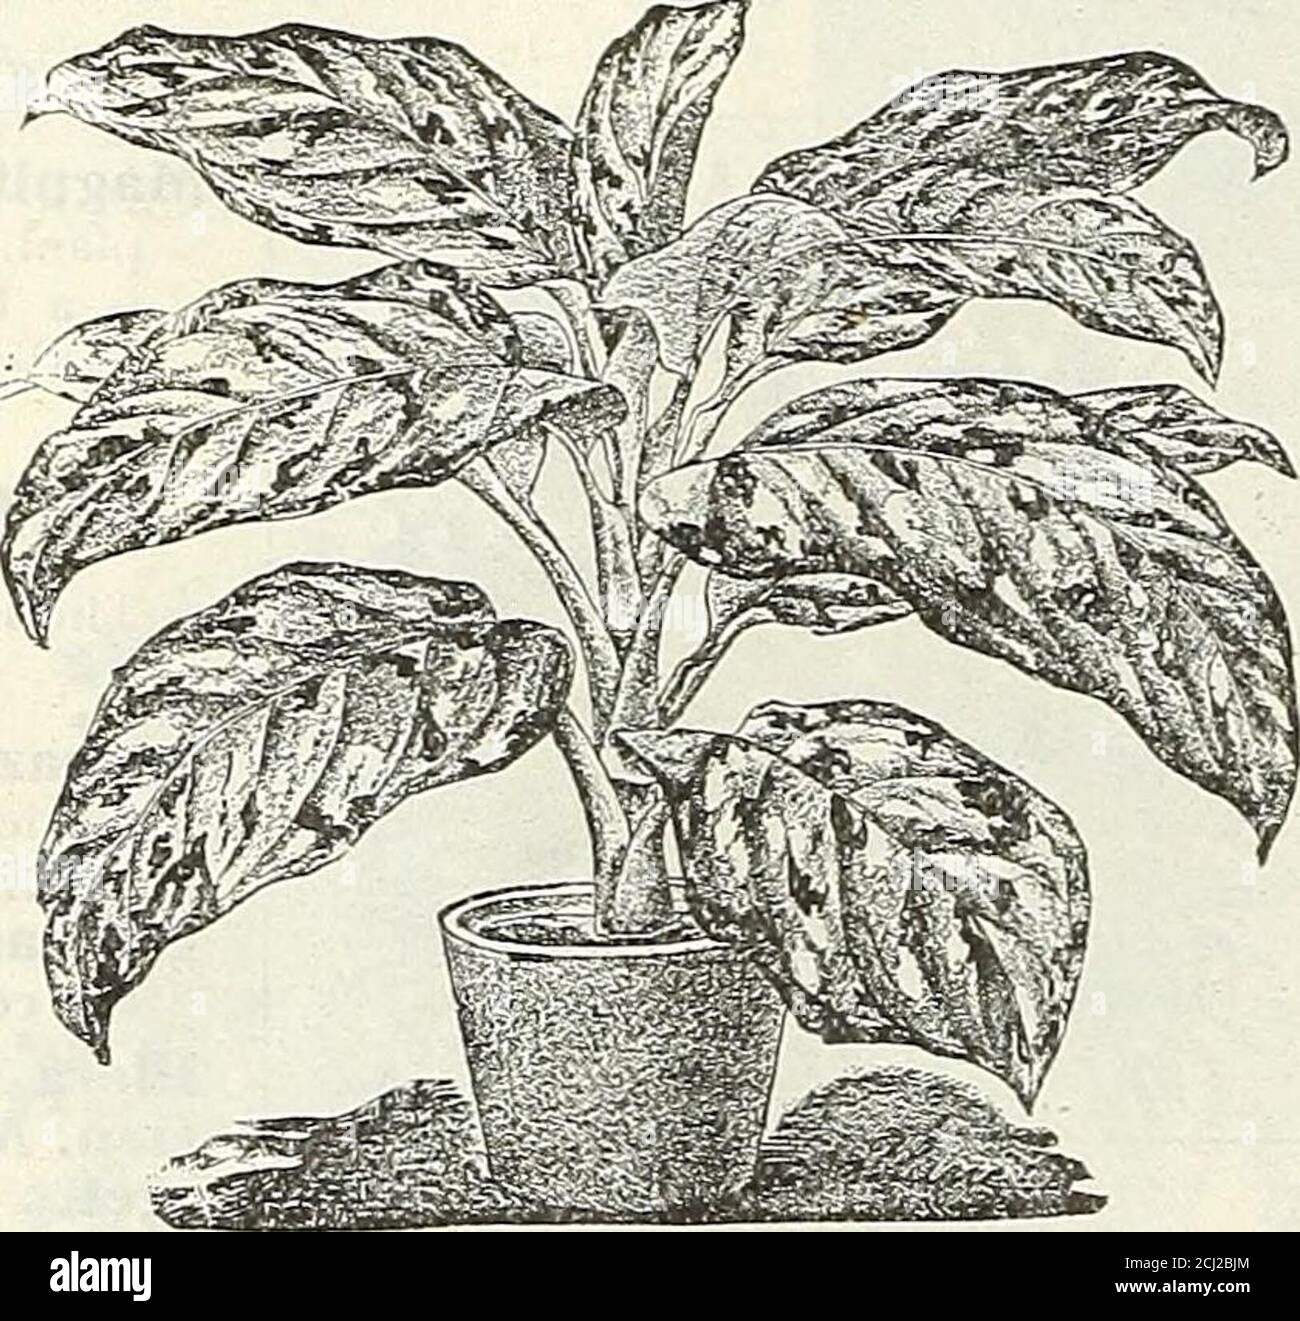 . Dreer's autumn 1904 catalogue . Carnation. The beautiful Xarcissus shown in colors on the cover .of this catalogue are offered on page 11. 30 Henry A, Dreer, Philadelptiia^ Pa* ^S ^A j 1 ^-^Ugl^ fy .^■!- CYCAS REVOLUTA (SagoPalm). Valuable drcoraiive plants bulh loi lawn and house decora-tion ; iheir heavy, glossy, deep green trends resist alike thegas, dust and cold to which decorative plants are frequentlyexposed. We grow an immense stock of them, and have anexceptionally fine lot in popular sizes for house decoration. Height Number Length of Stem. of Leaves. of Leaves. 4 10 tj in. 7 10 8 Stock Photo